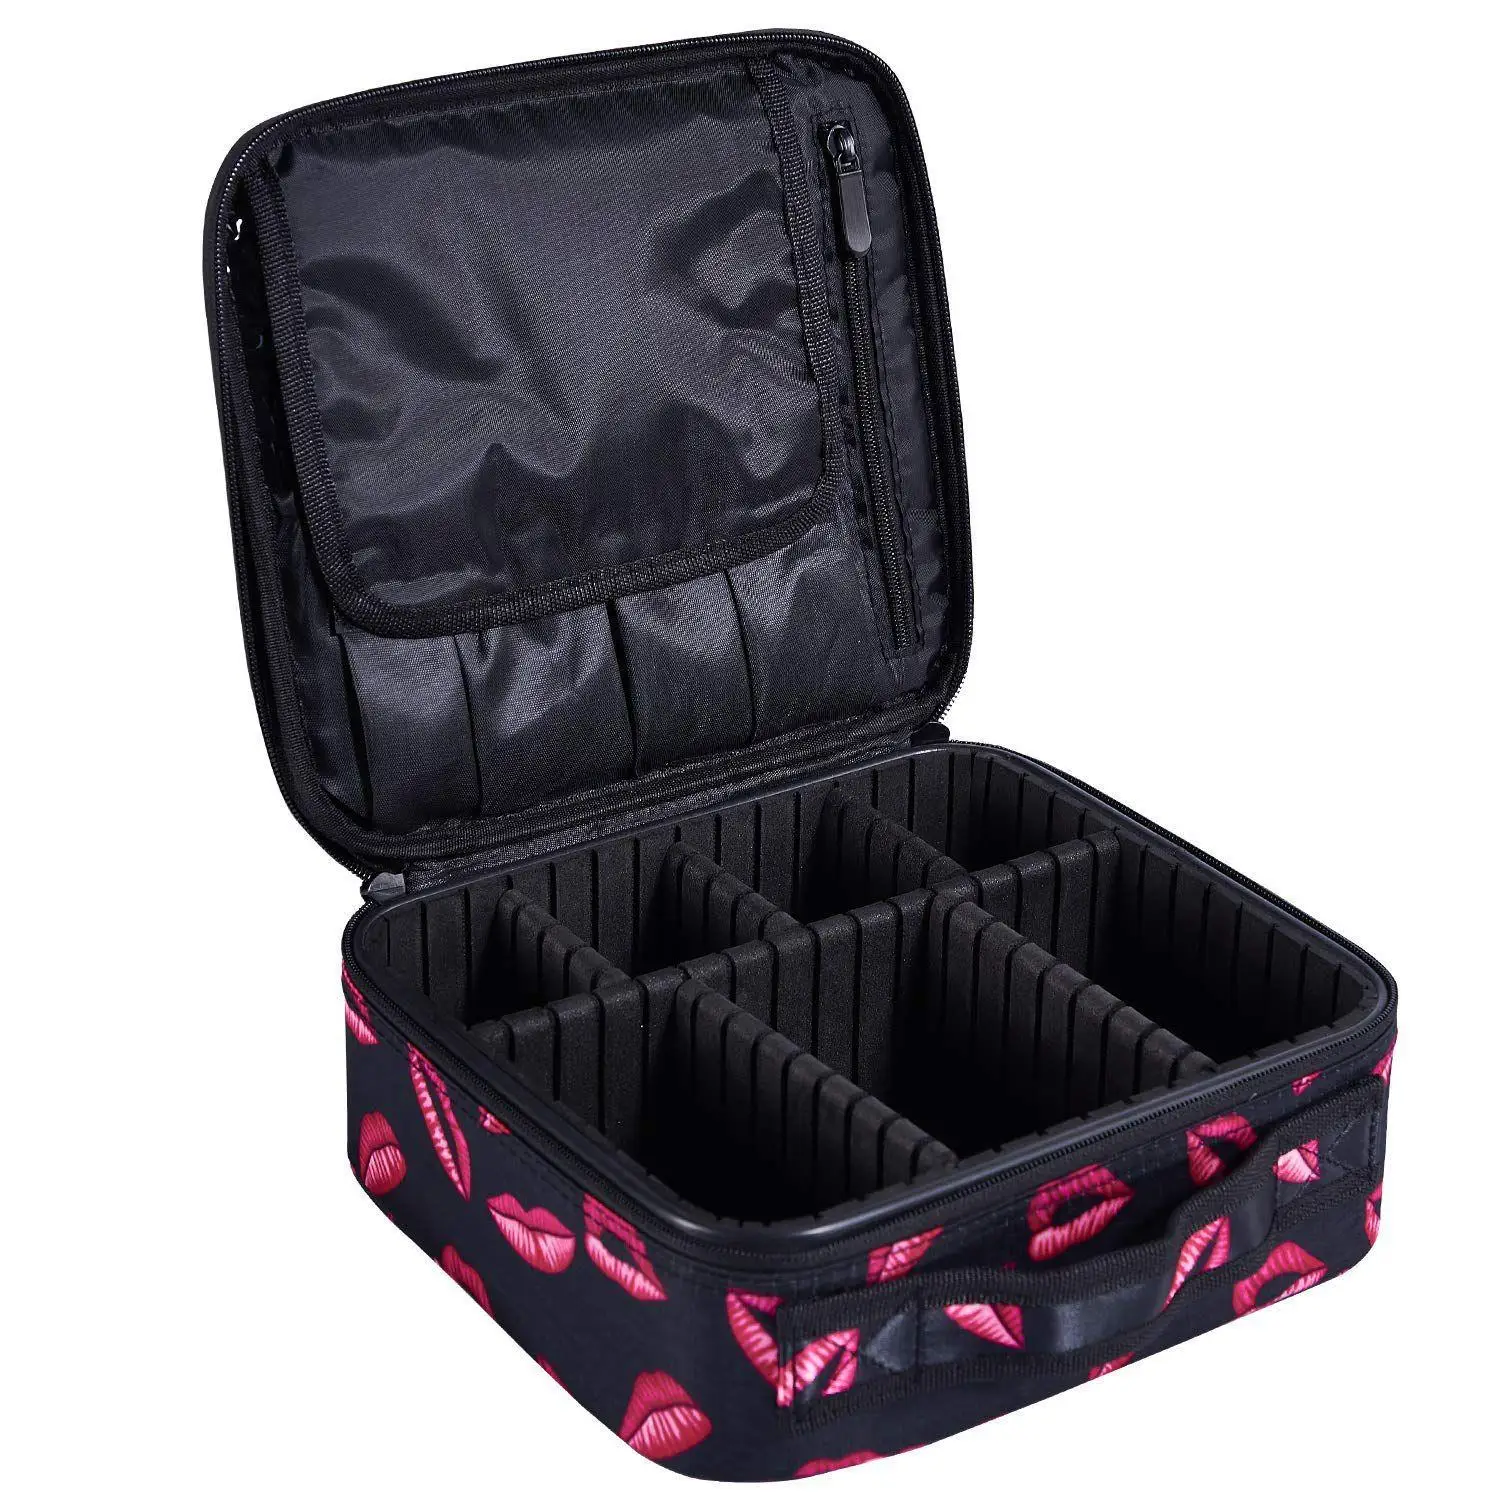 BEAU Portable Travel Makeup Train Case Cosmetic Bag Organizer with